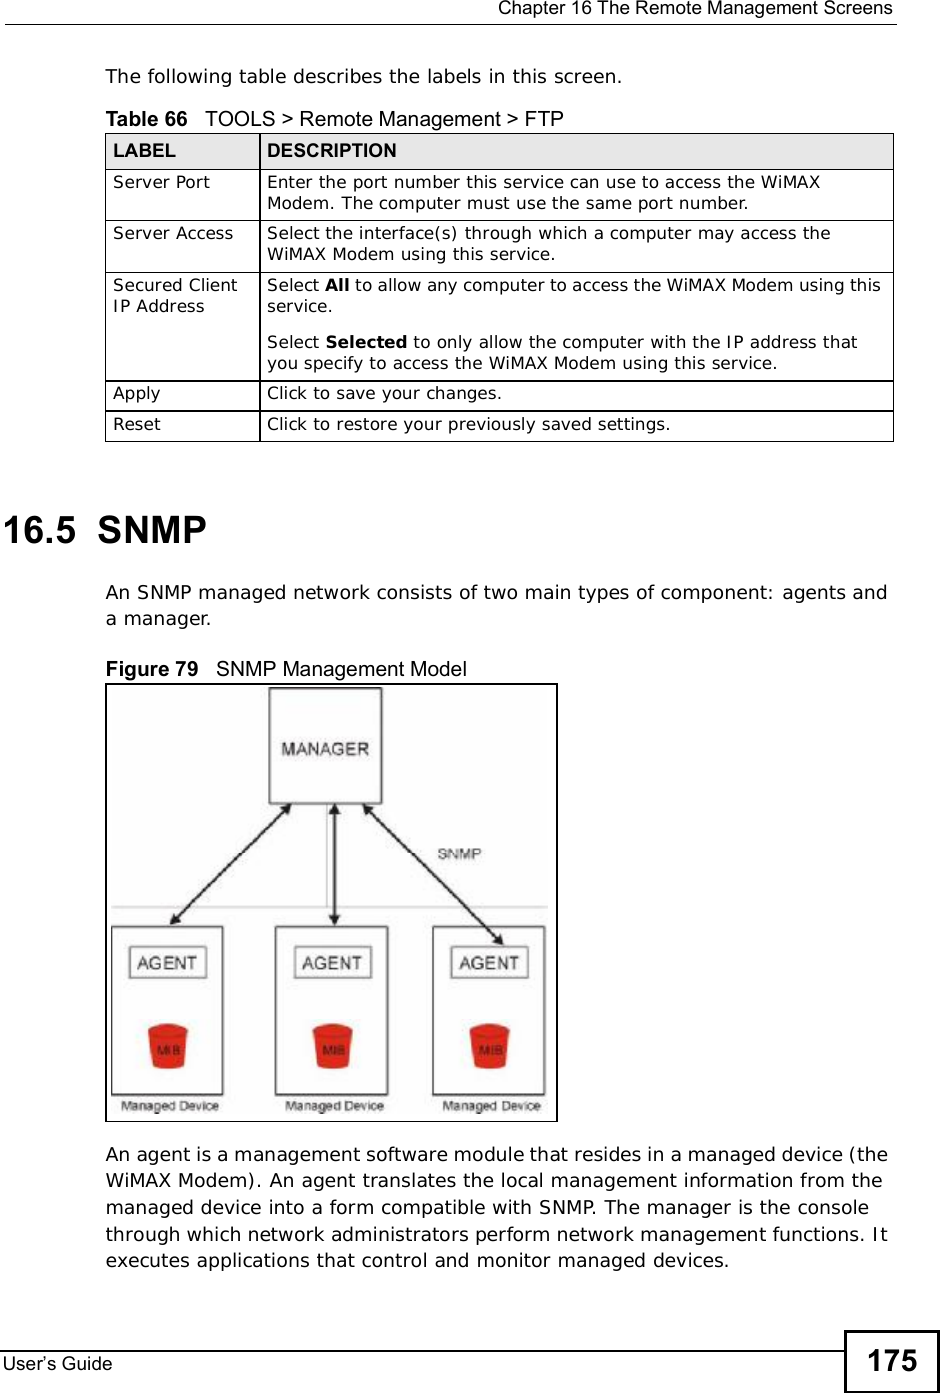  Chapter 16The Remote Management ScreensUser s Guide 175The following table describes the labels in this screen.16.5  SNMPAn SNMP managed network consists of two main types of component: agents and a manager.Figure 79   SNMP Management ModelAn agent is a management software module that resides in a managed device (the WiMAX Modem). An agent translates the local management information from the managed device into a form compatible with SNMP. The manager is the console through which network administrators perform network management functions. It executes applications that control and monitor managed devices. Table 66   TOOLS &gt; Remote Management &gt; FTPLABEL DESCRIPTIONServer Port Enter the port number this service can use to access the WiMAX Modem. The computer must use the same port number.Server Access Select the interface(s) through which a computer may access the WiMAX Modem using this service.Secured Client IP Address Select All to allow any computer to access the WiMAX Modem using this service.Select Selected to only allow the computer with the IP address that you specify to access the WiMAX Modem using this service.Apply Click to save your changes.Reset Click to restore your previously saved settings.